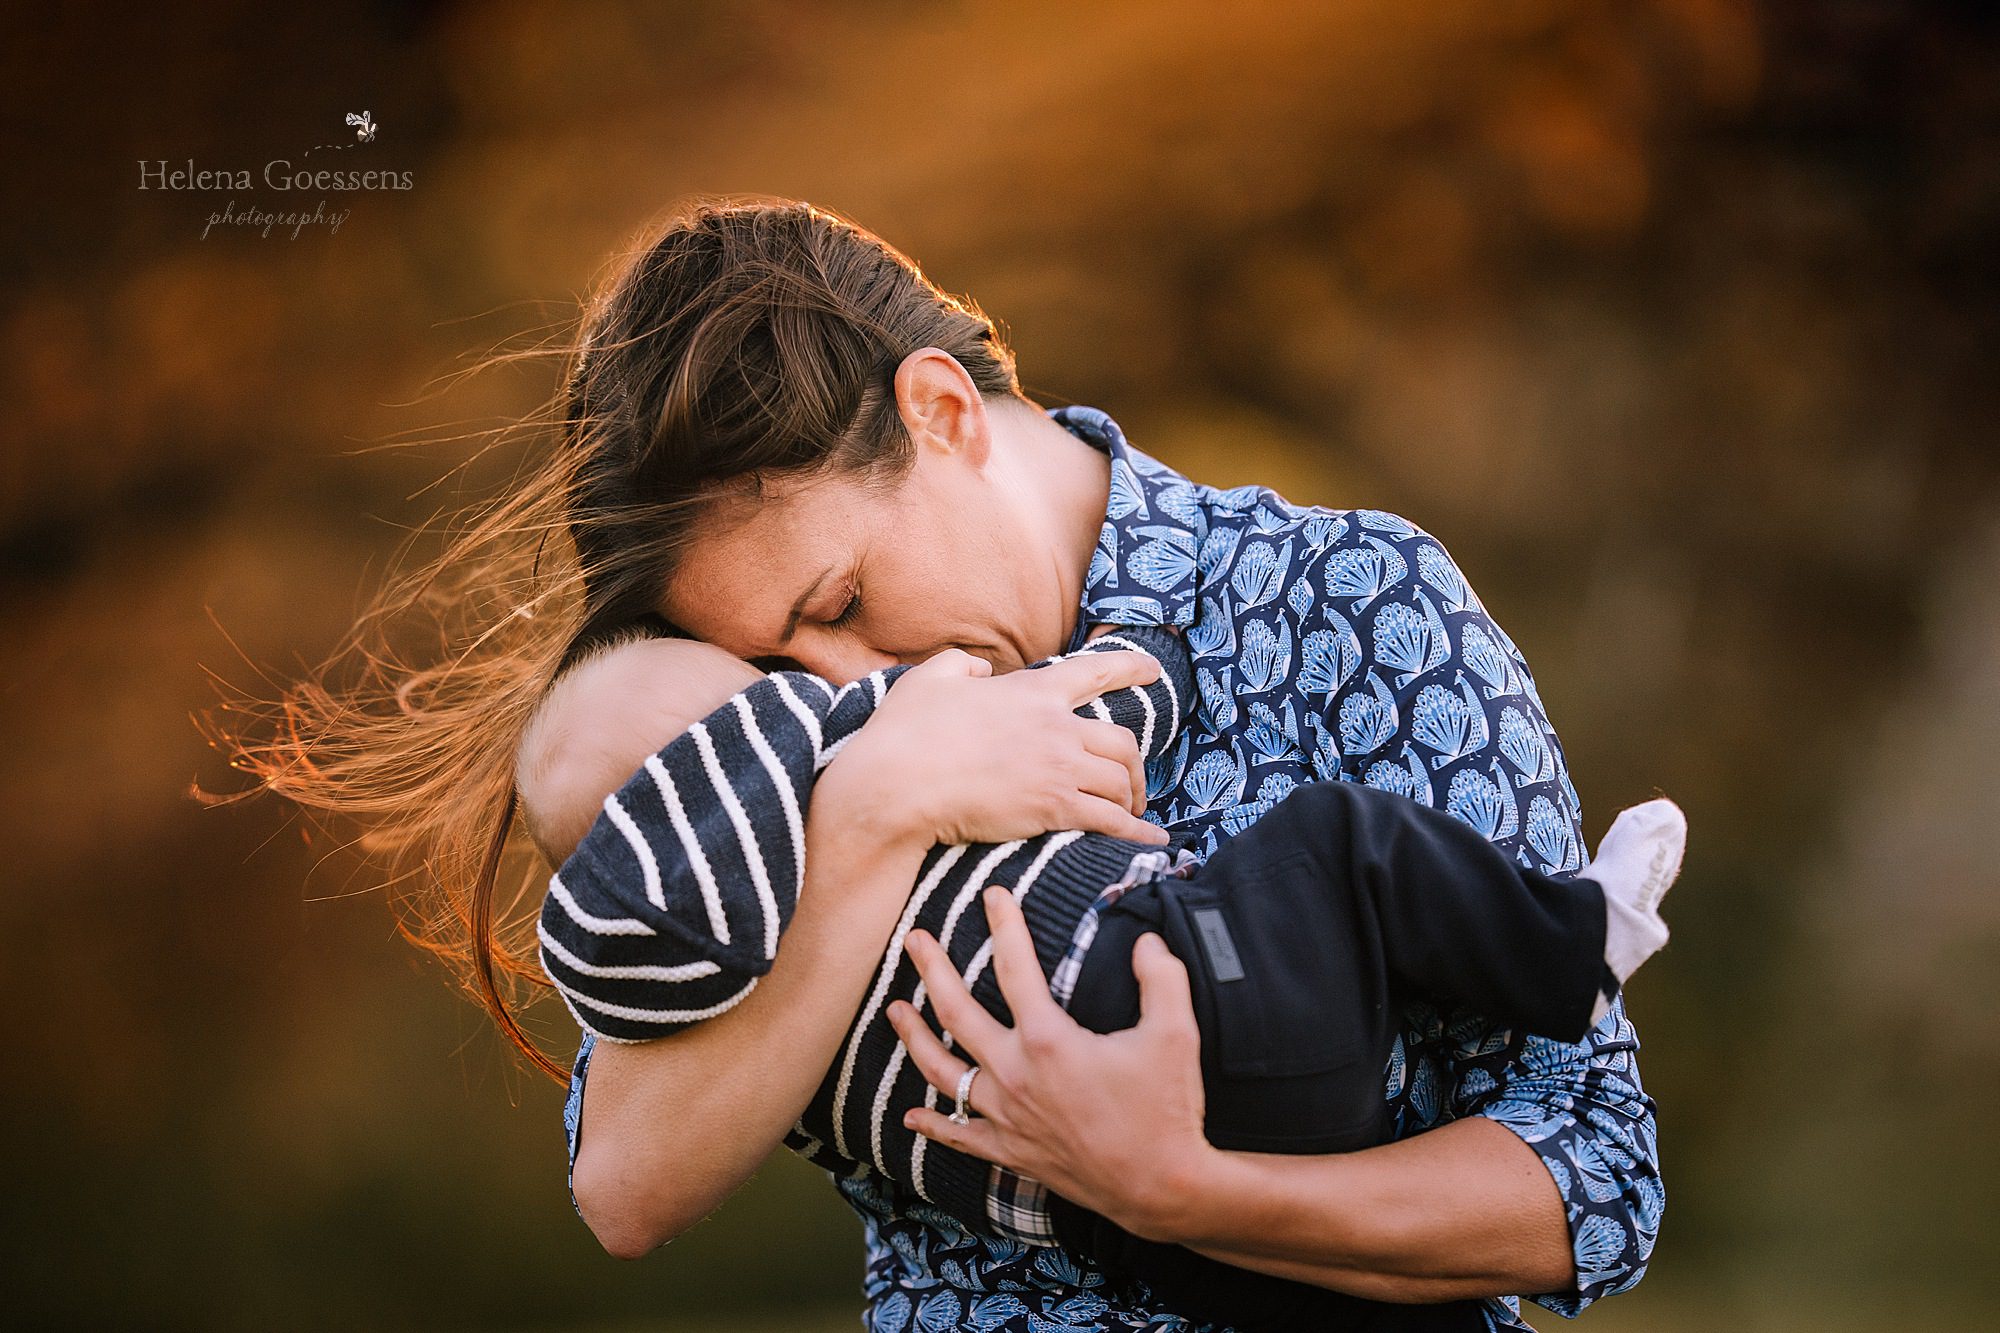 Helena Goessens Photography photographs mother and son during family photo session